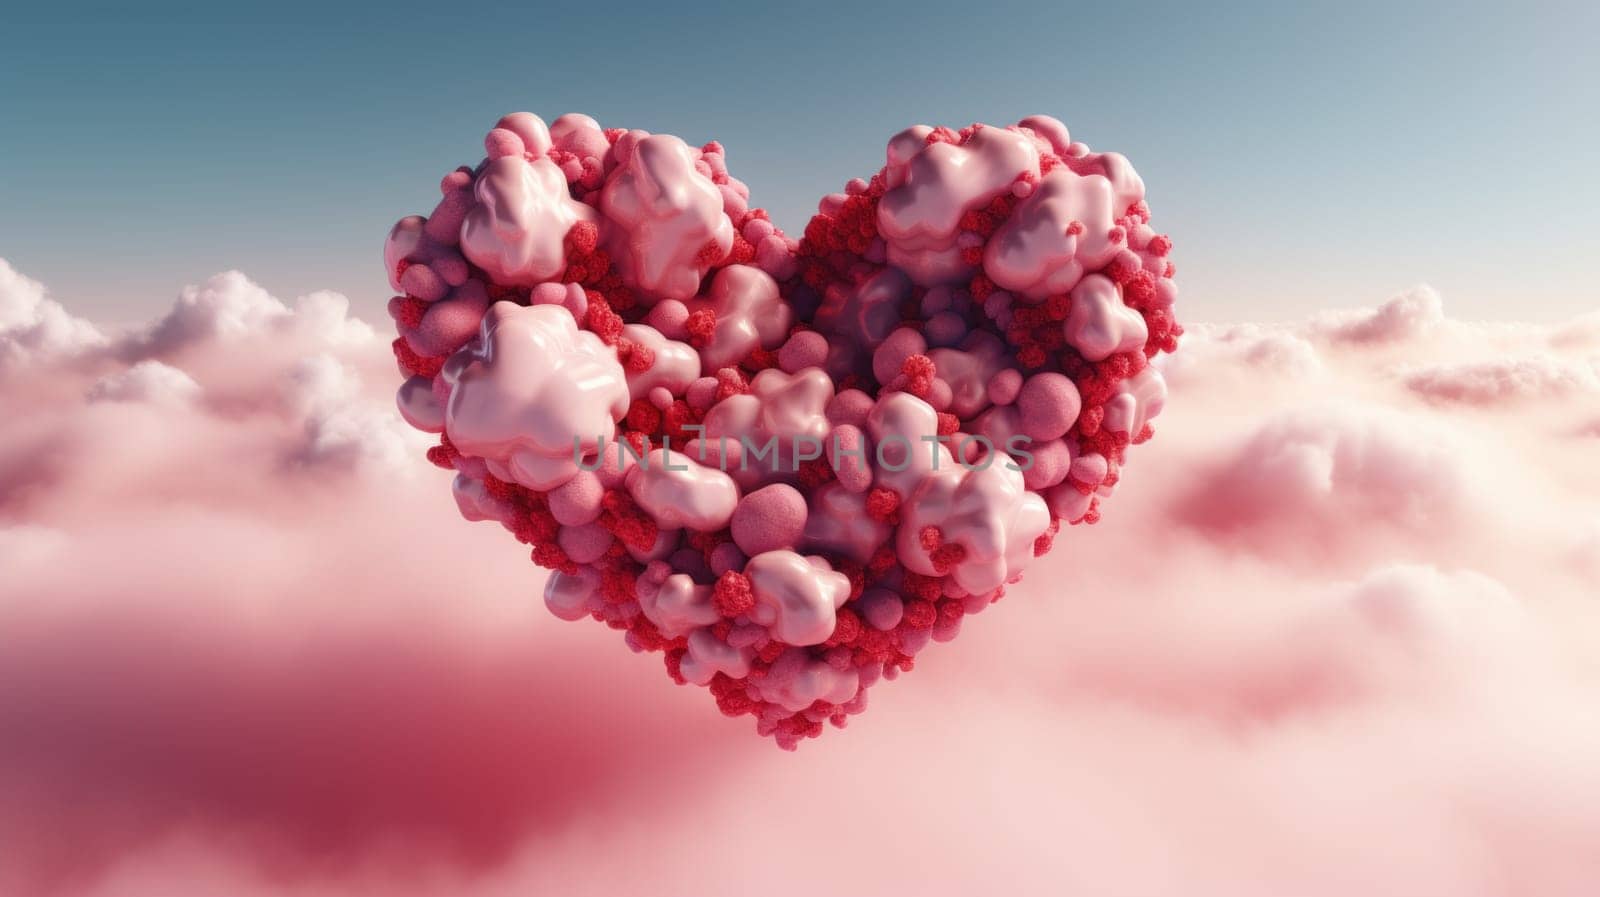 A heart shaped cloud with pink and white flowers in it